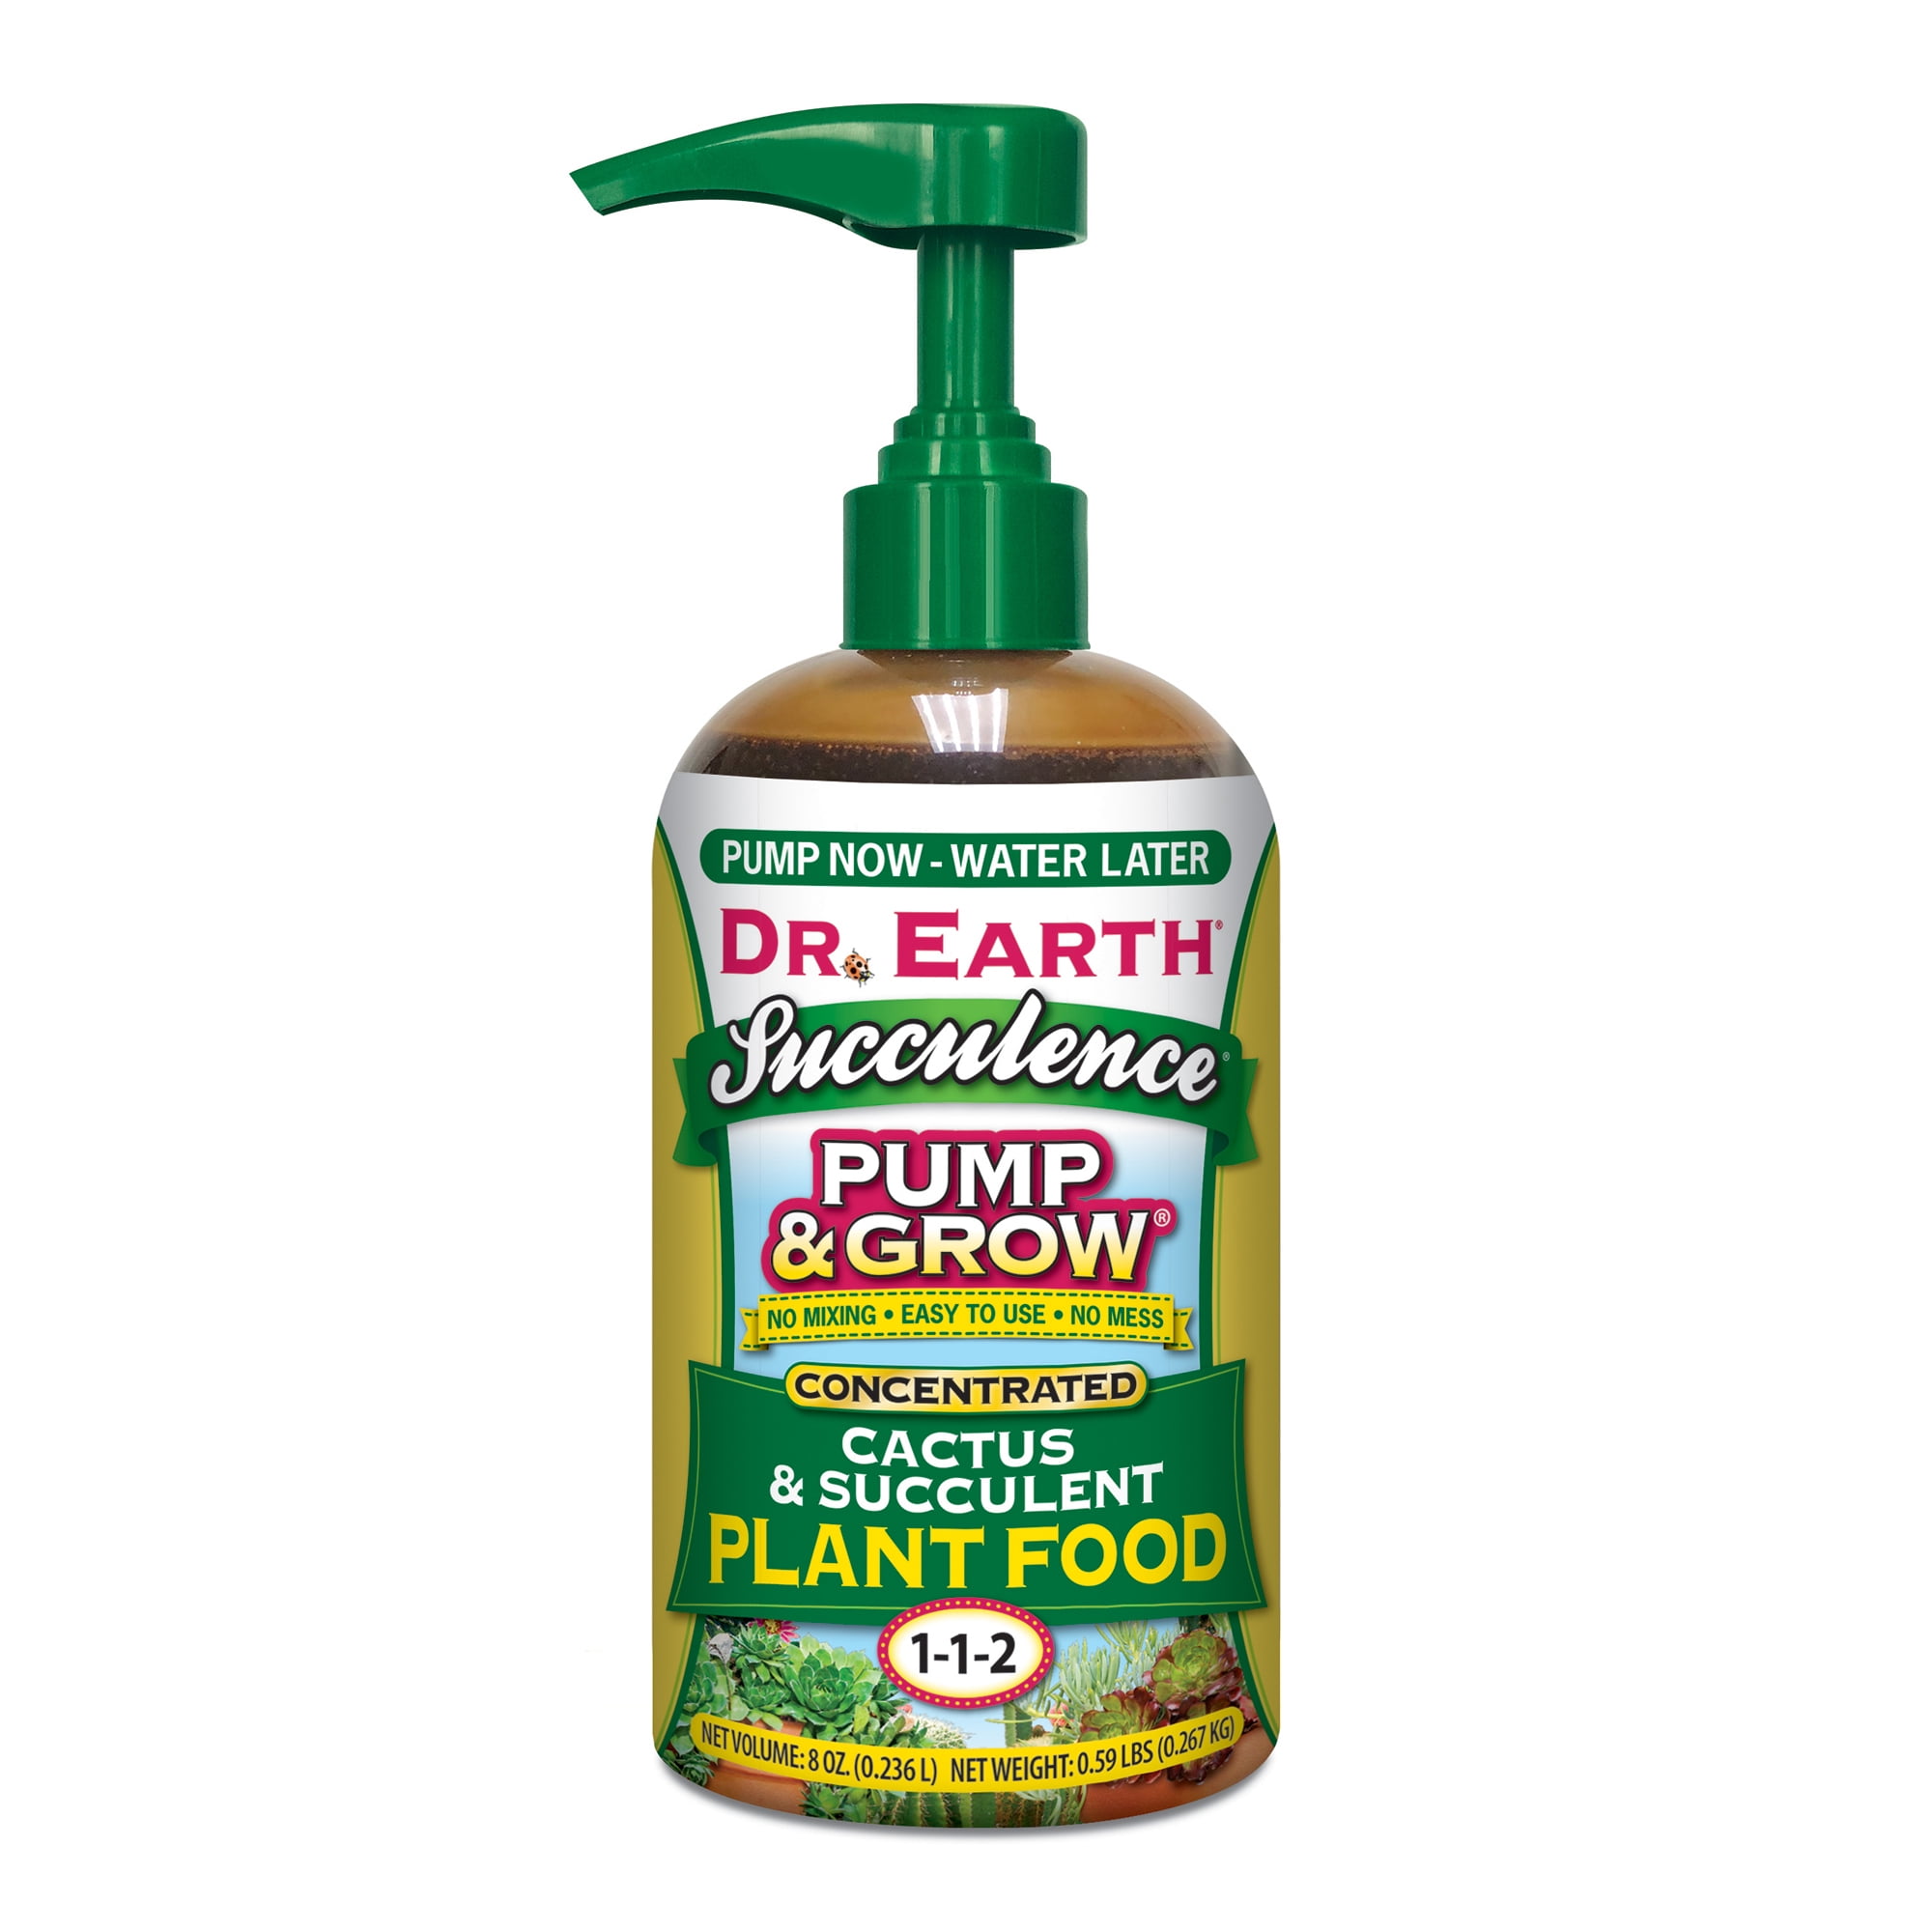 Picture of Dr. Earth 7002328 8 oz Succulence Pump & Grow Organic 1-1-2 Plant Food